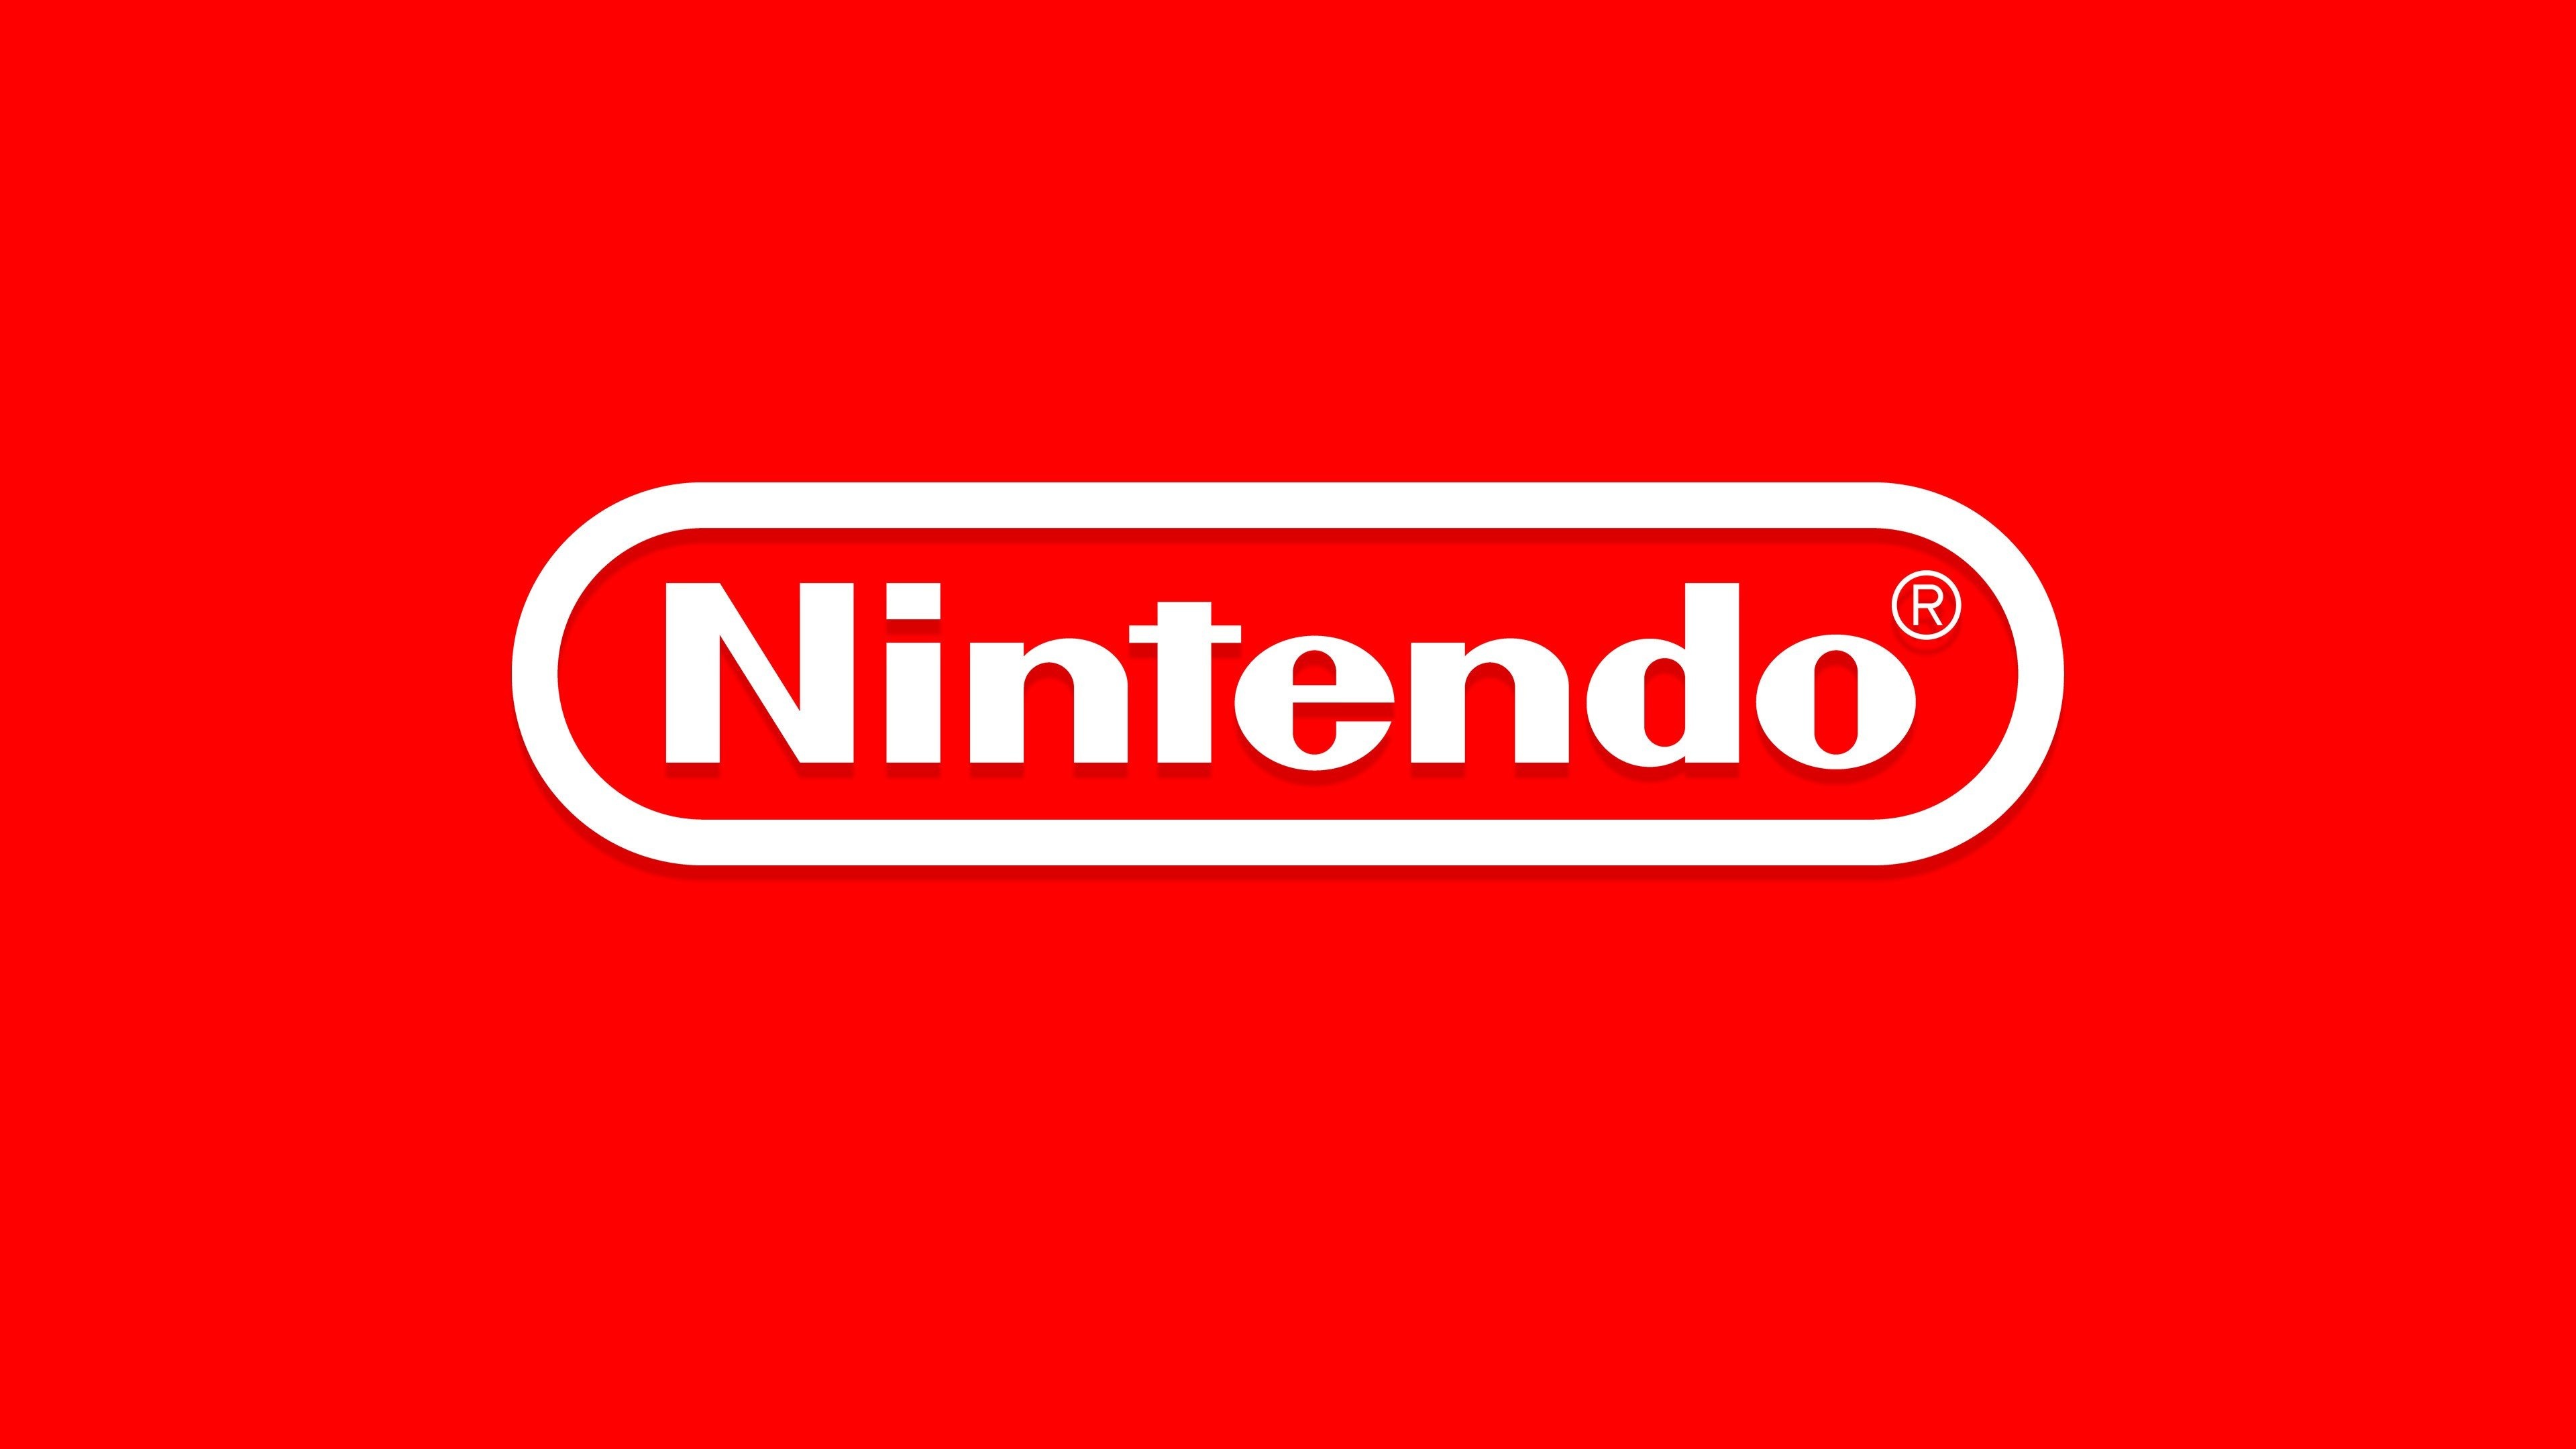 Nintendo: The development, manufacture, and sale of home entertainment products, Logo. 3840x2160 4K Background.